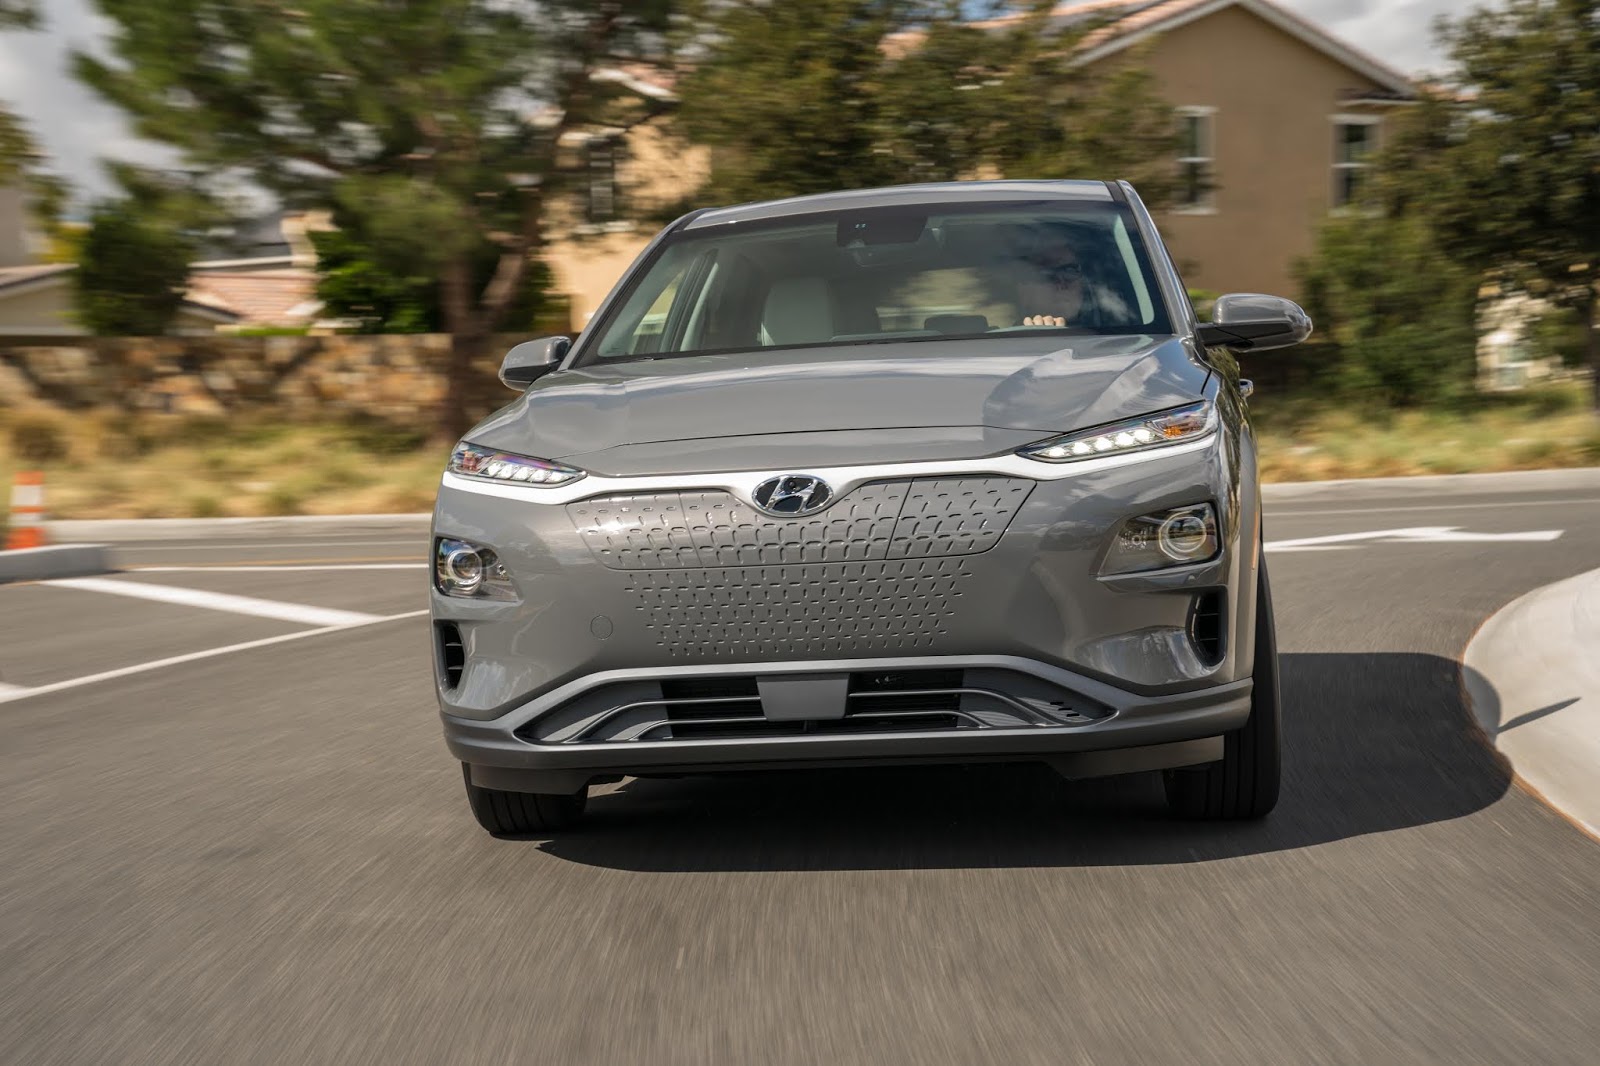 Hyundai Kona Electric: Top 10 Things To Know About India's First Long-range Electric SUV | VANDI4U